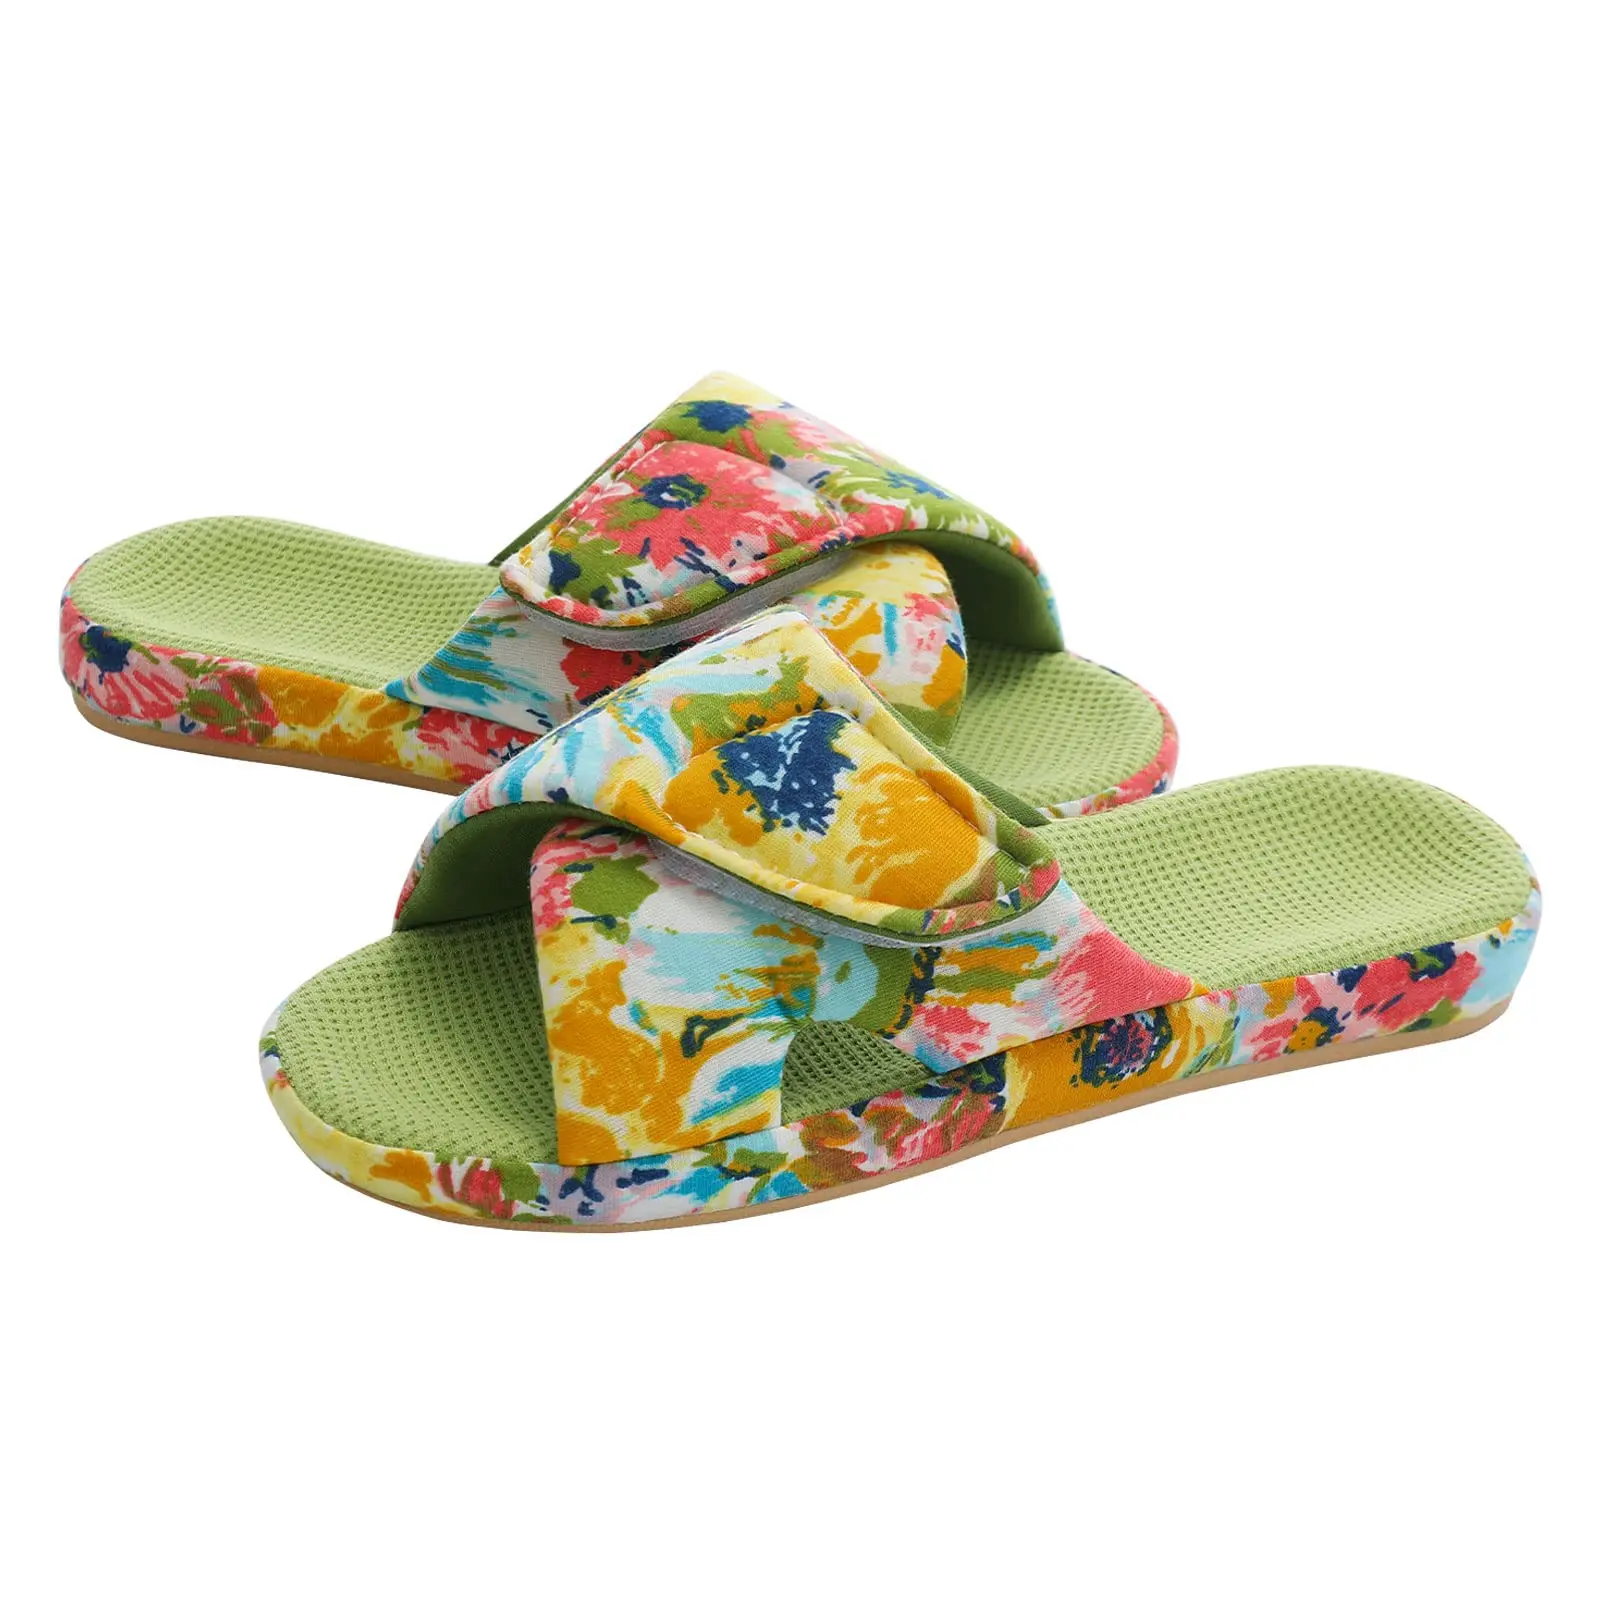 

Eyriphy Women Waffle Cotton Slippers Memory Foam Flat Sandals Indoor Casual Comfort Home Shoes With Arch Support Printed Slides